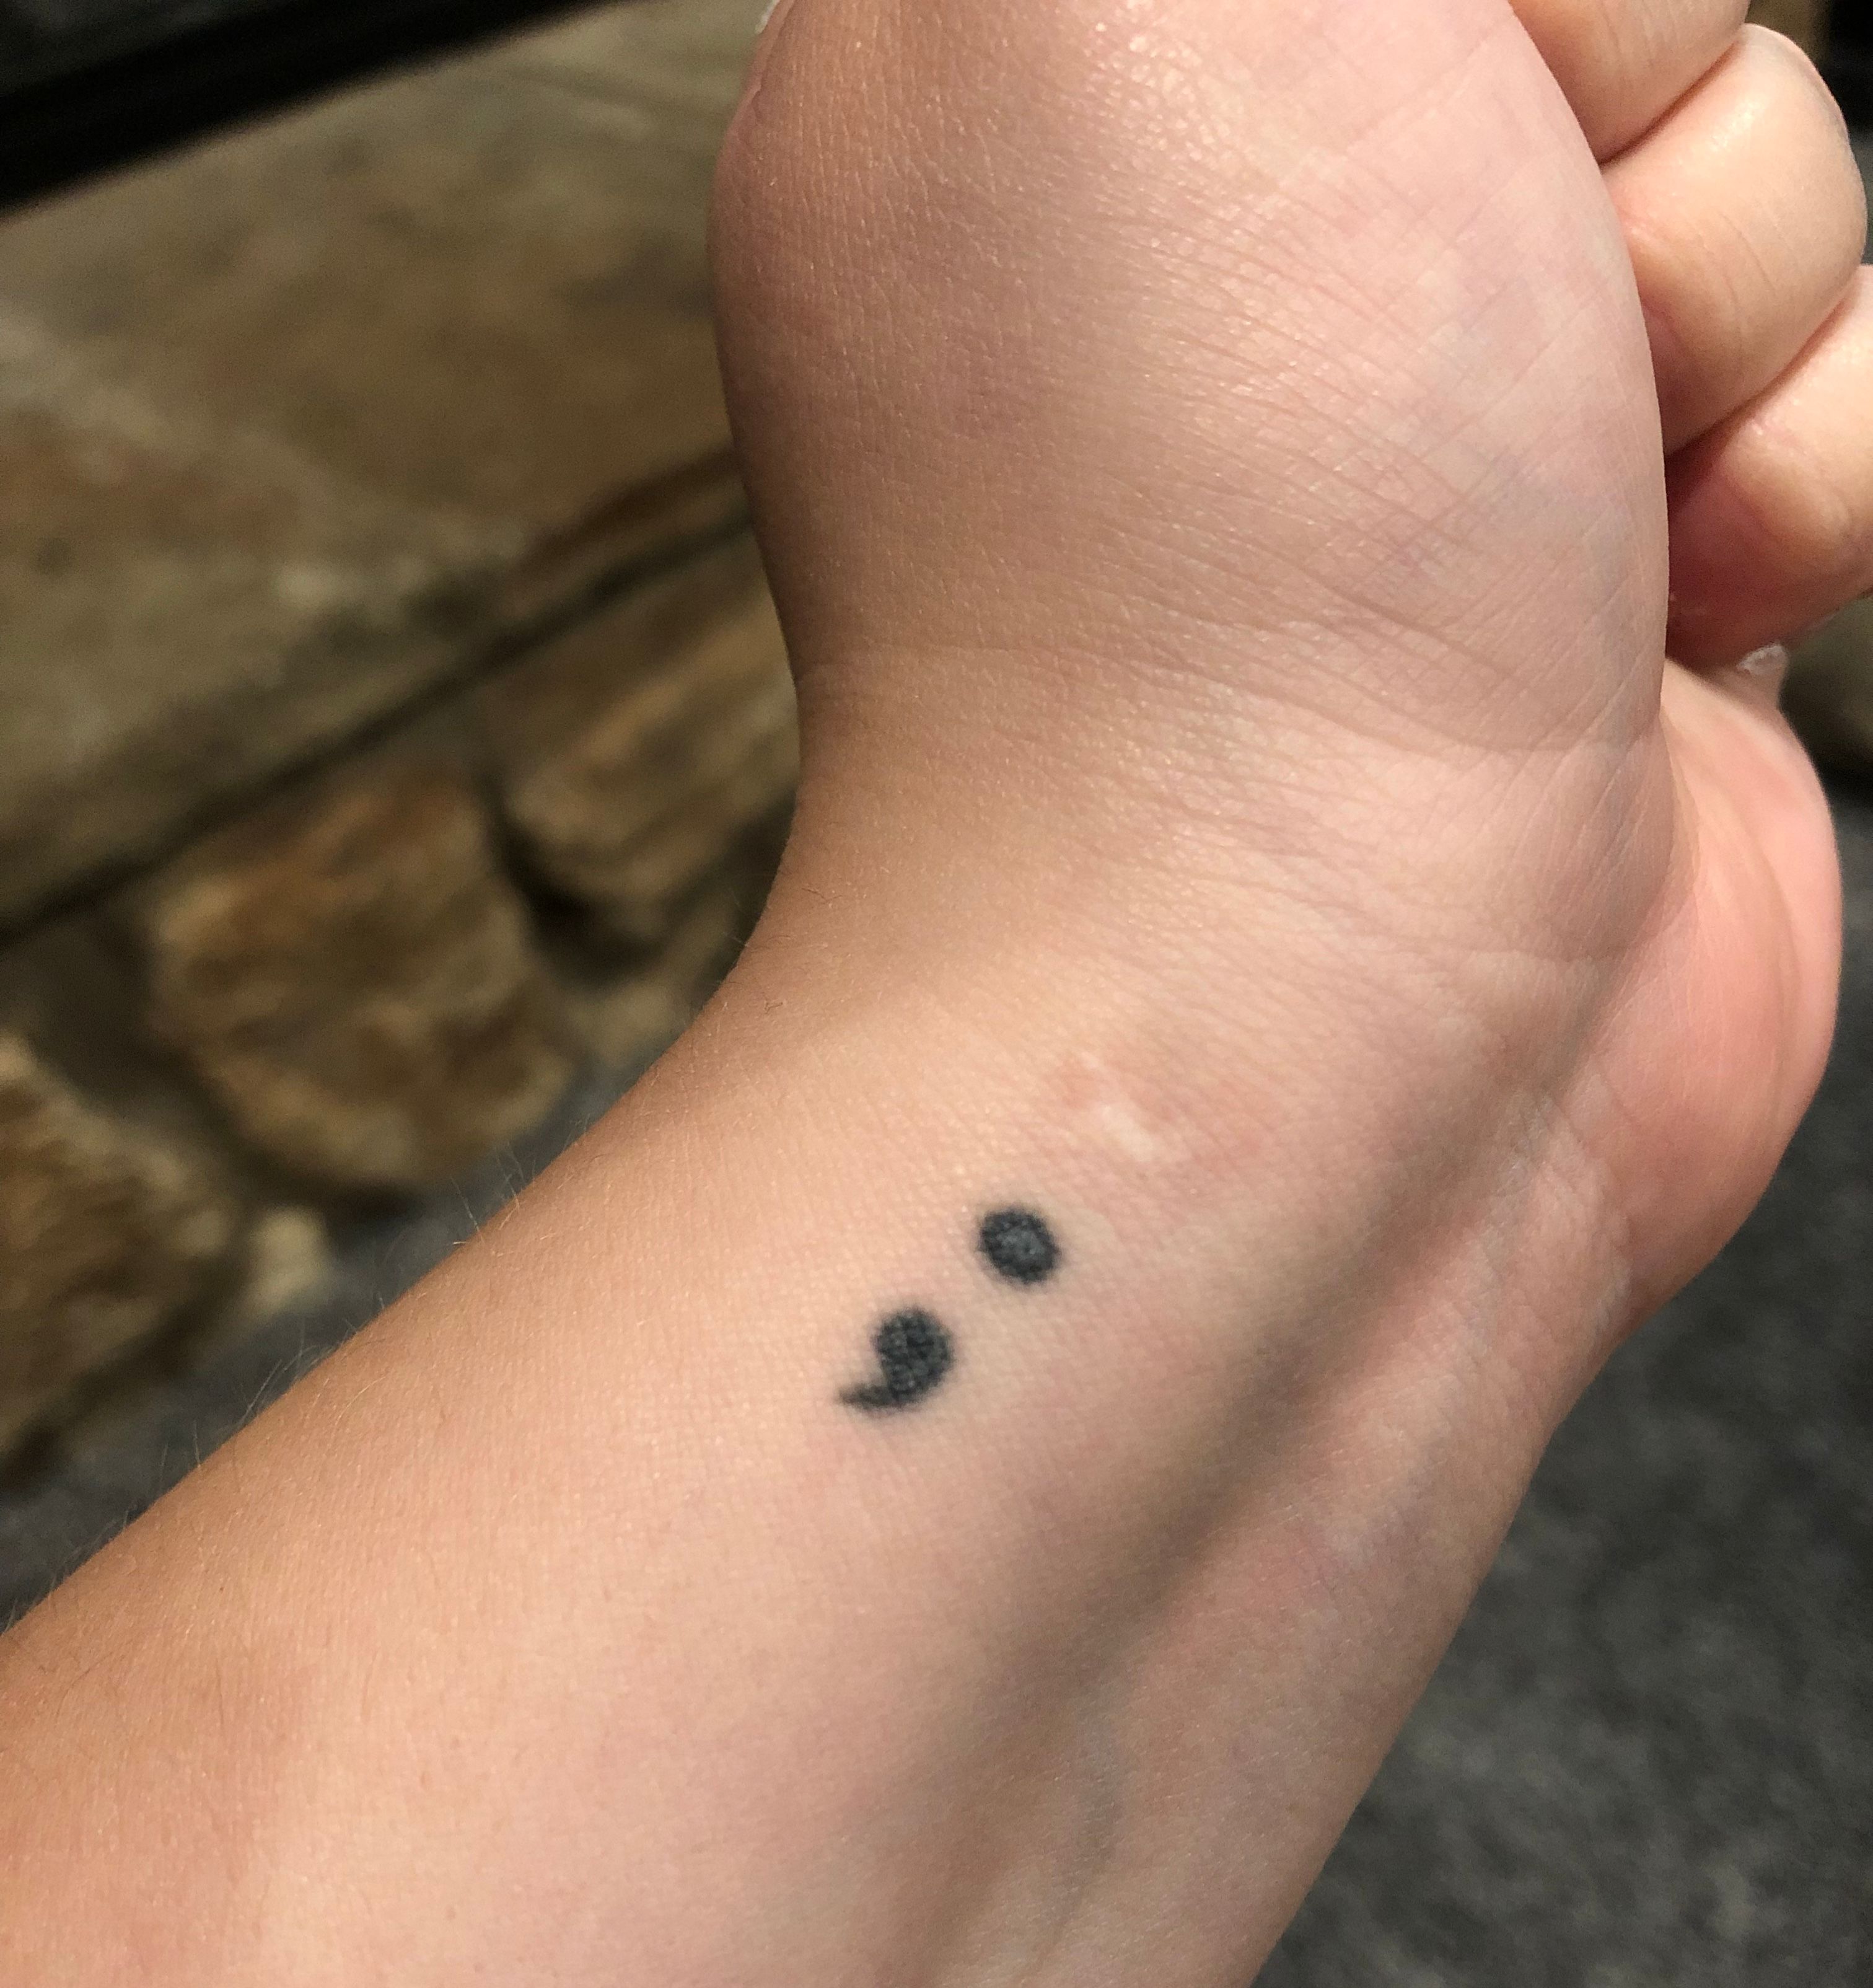 The Dragonfly Forest: My story is not ending - Project Semicolon & my tattoo